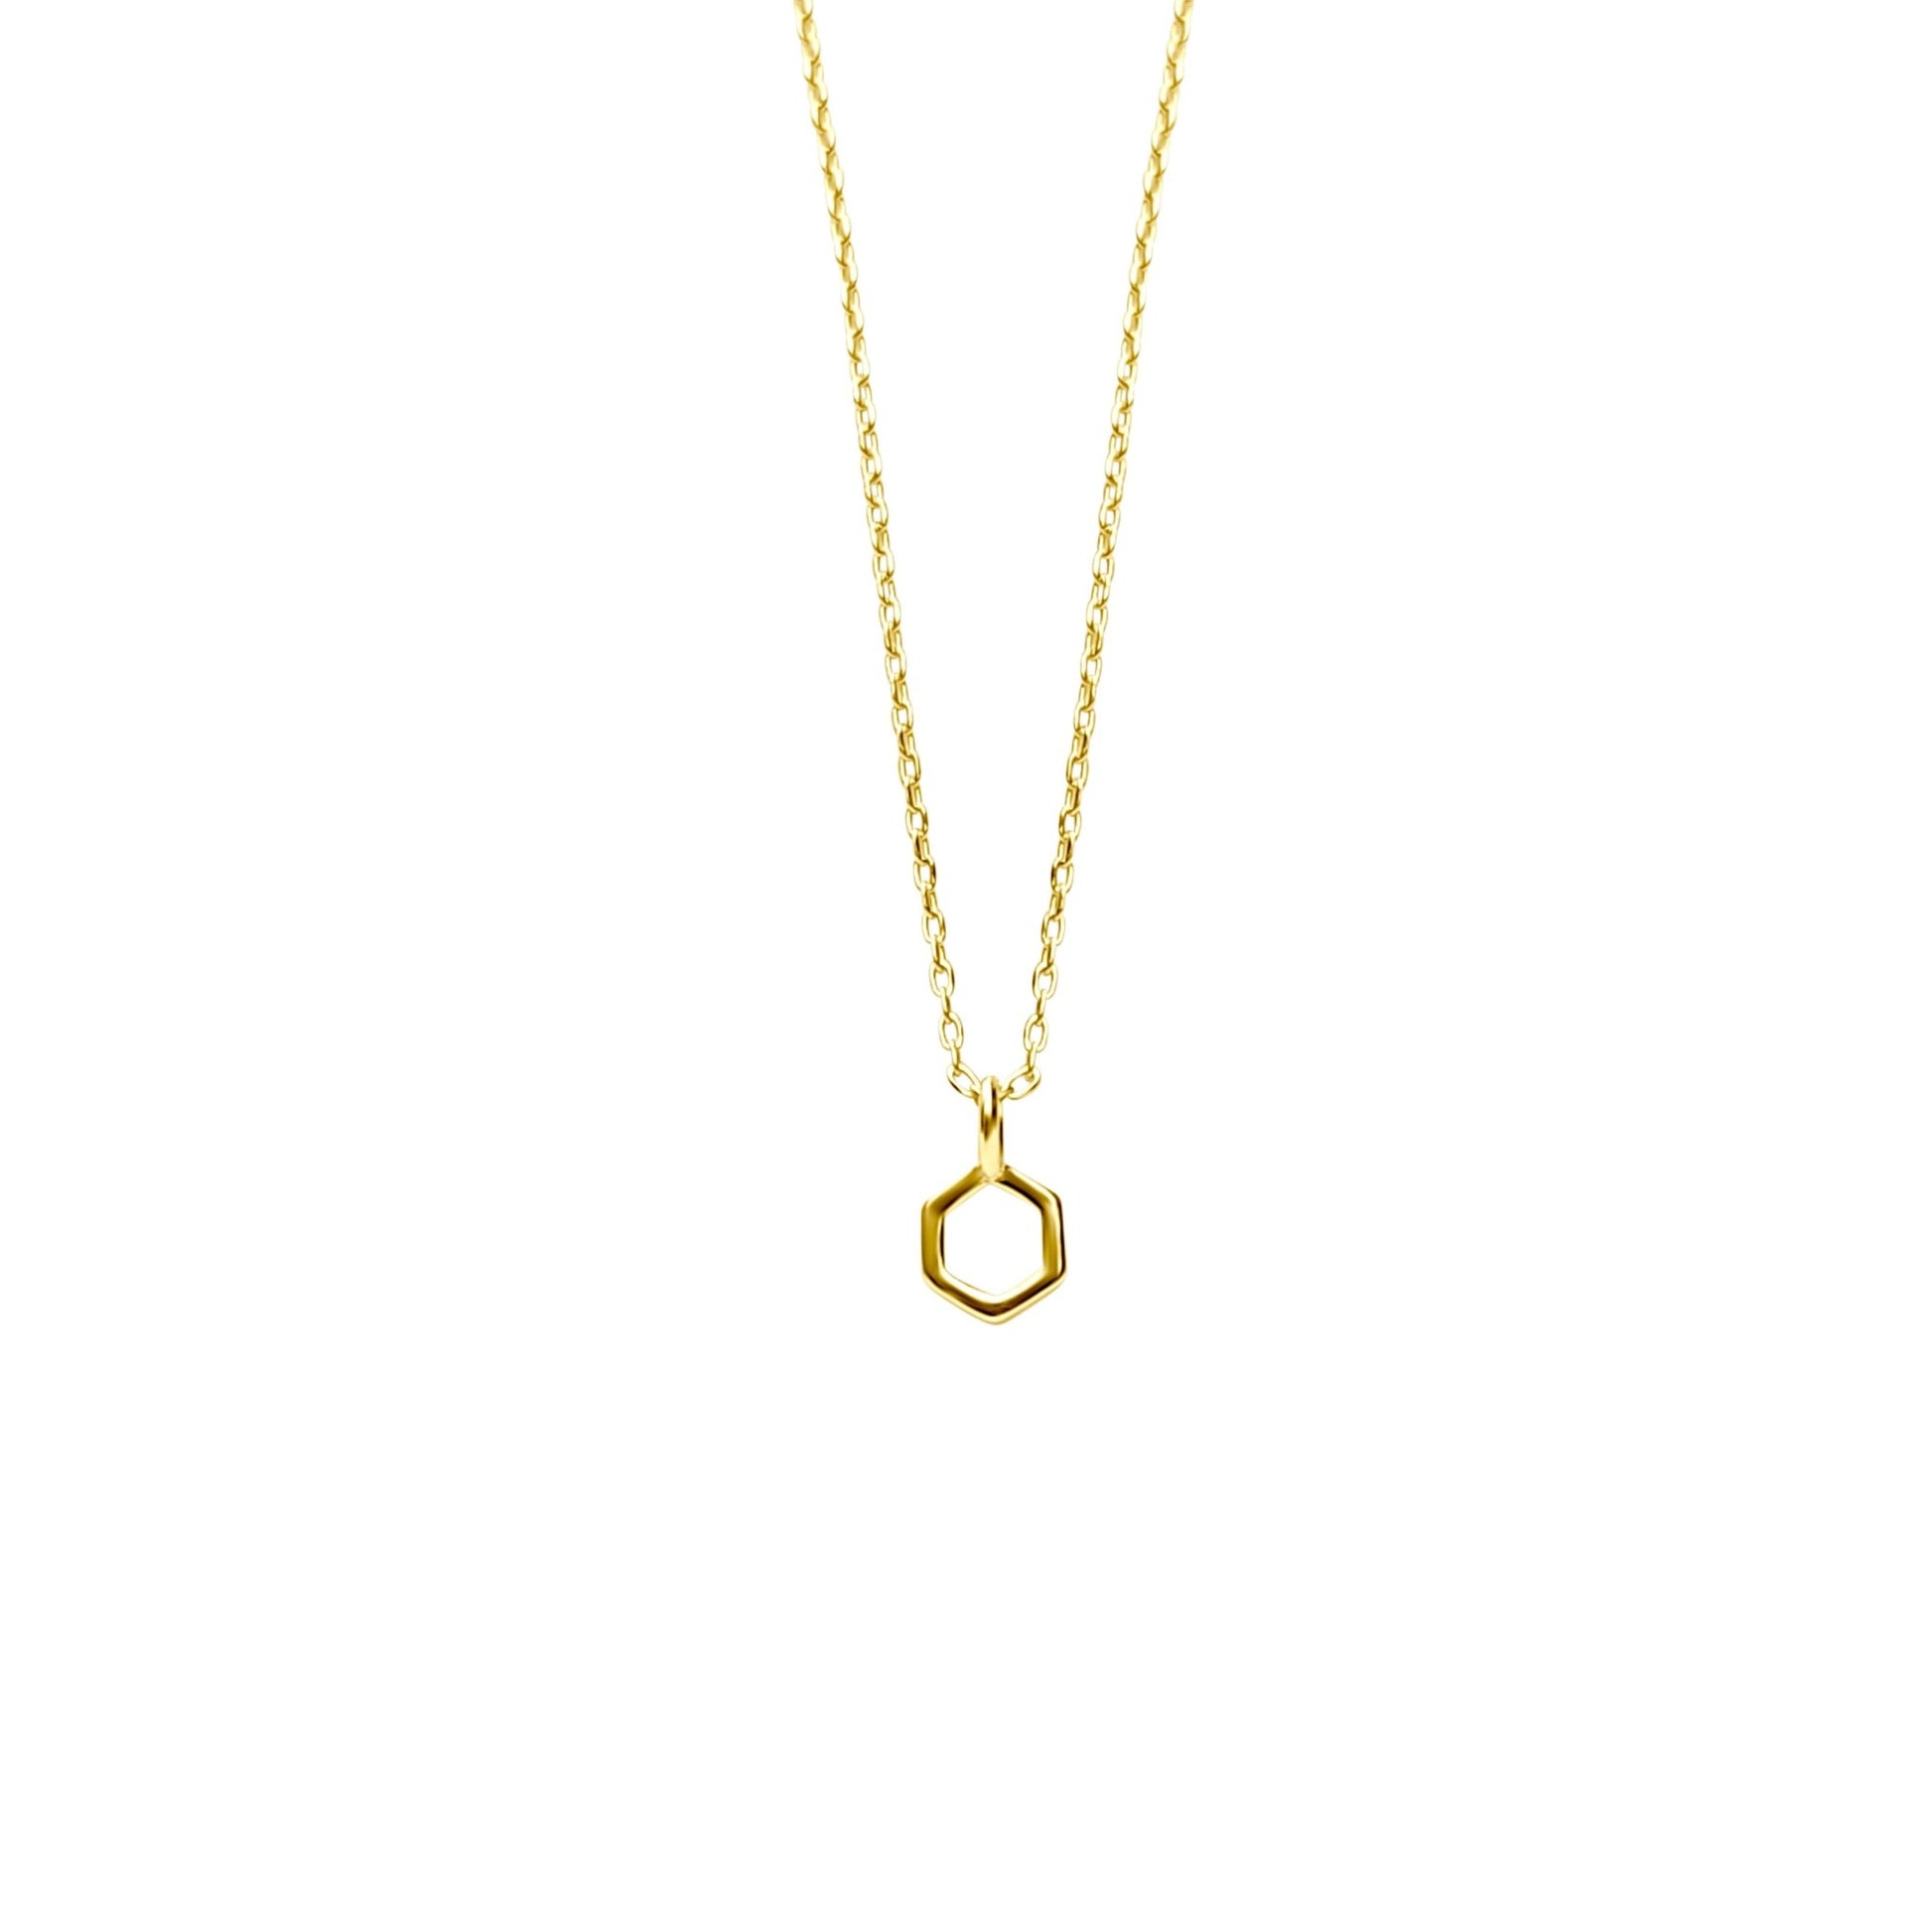 SMALL GOLD UNDERSTAED LITTLE HEXAGON NECKLACE